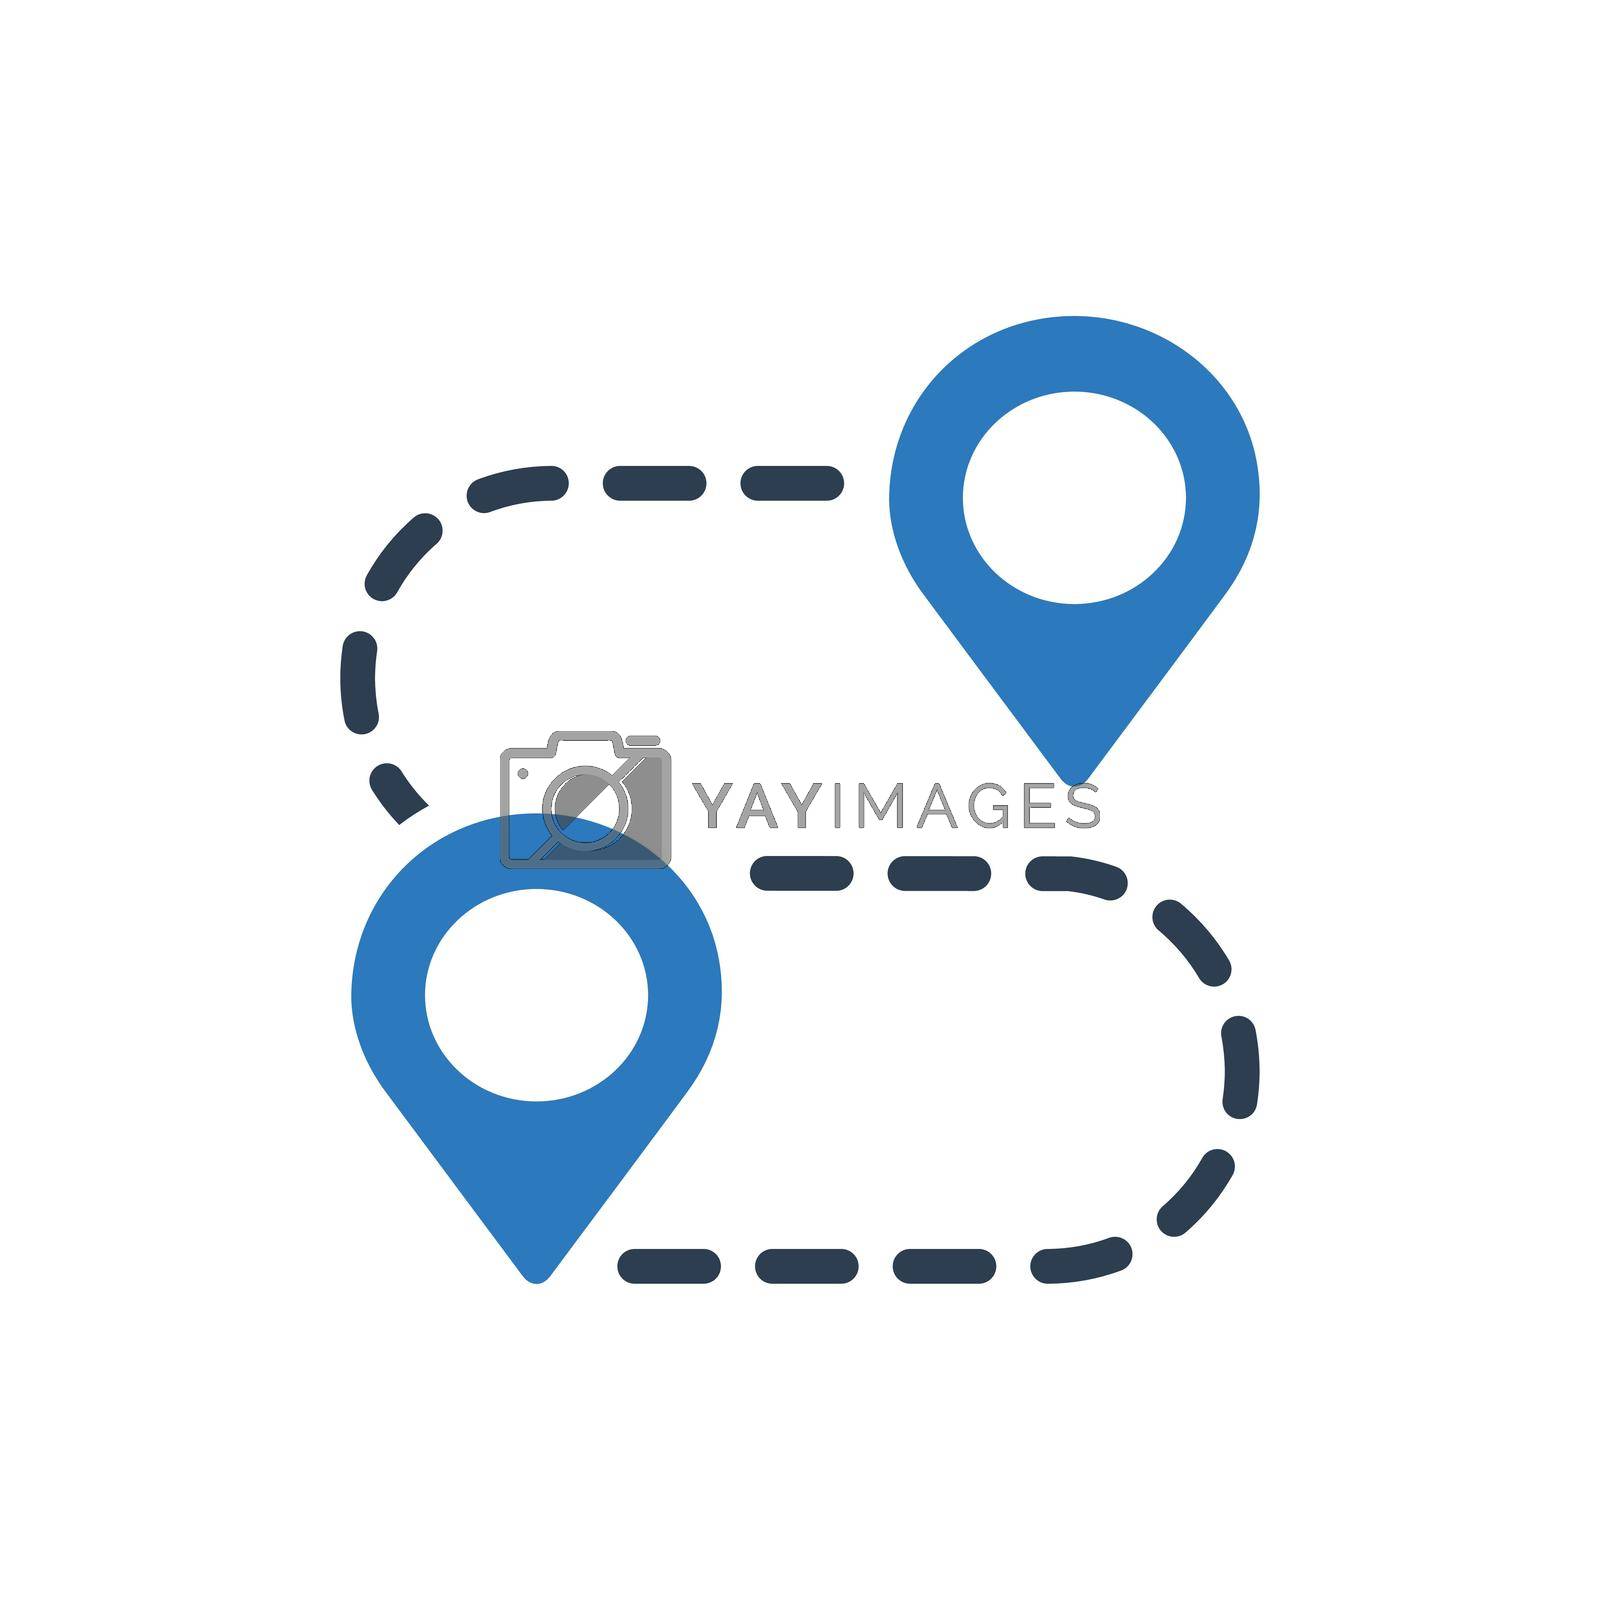 Travel Direction icon. Vector EPS file.